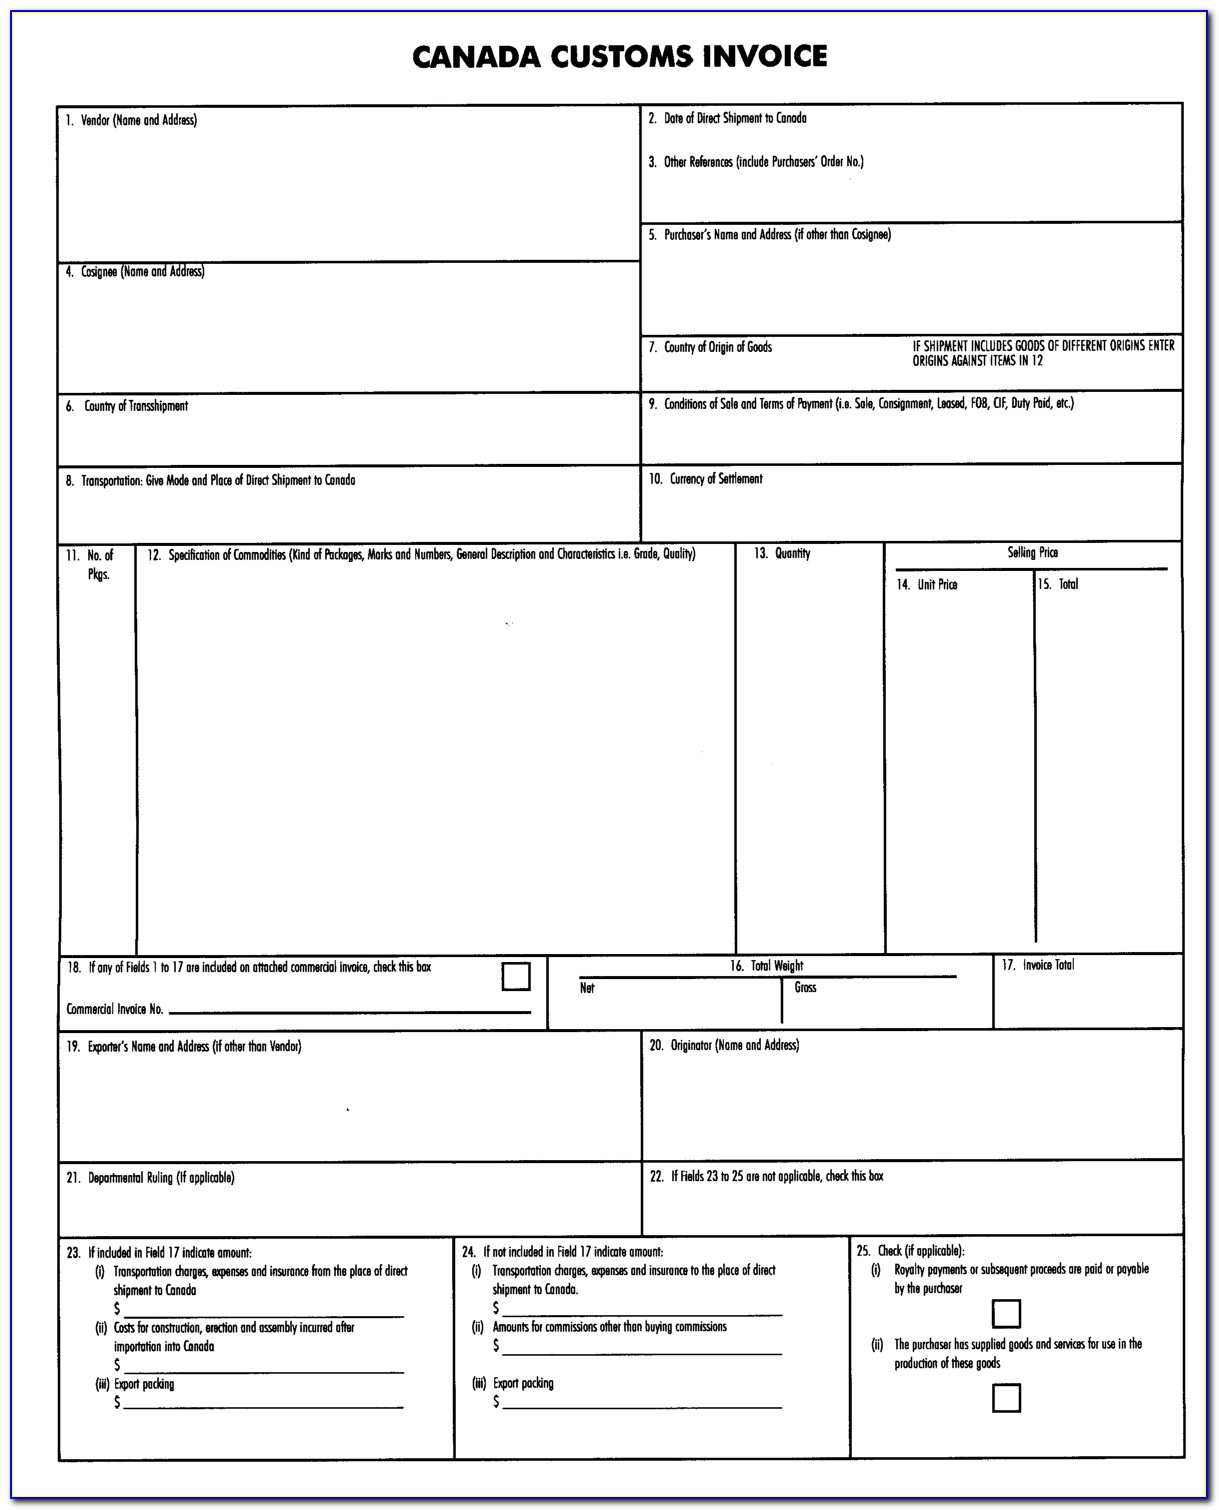 fillable-form-custom-printable-forms-free-online